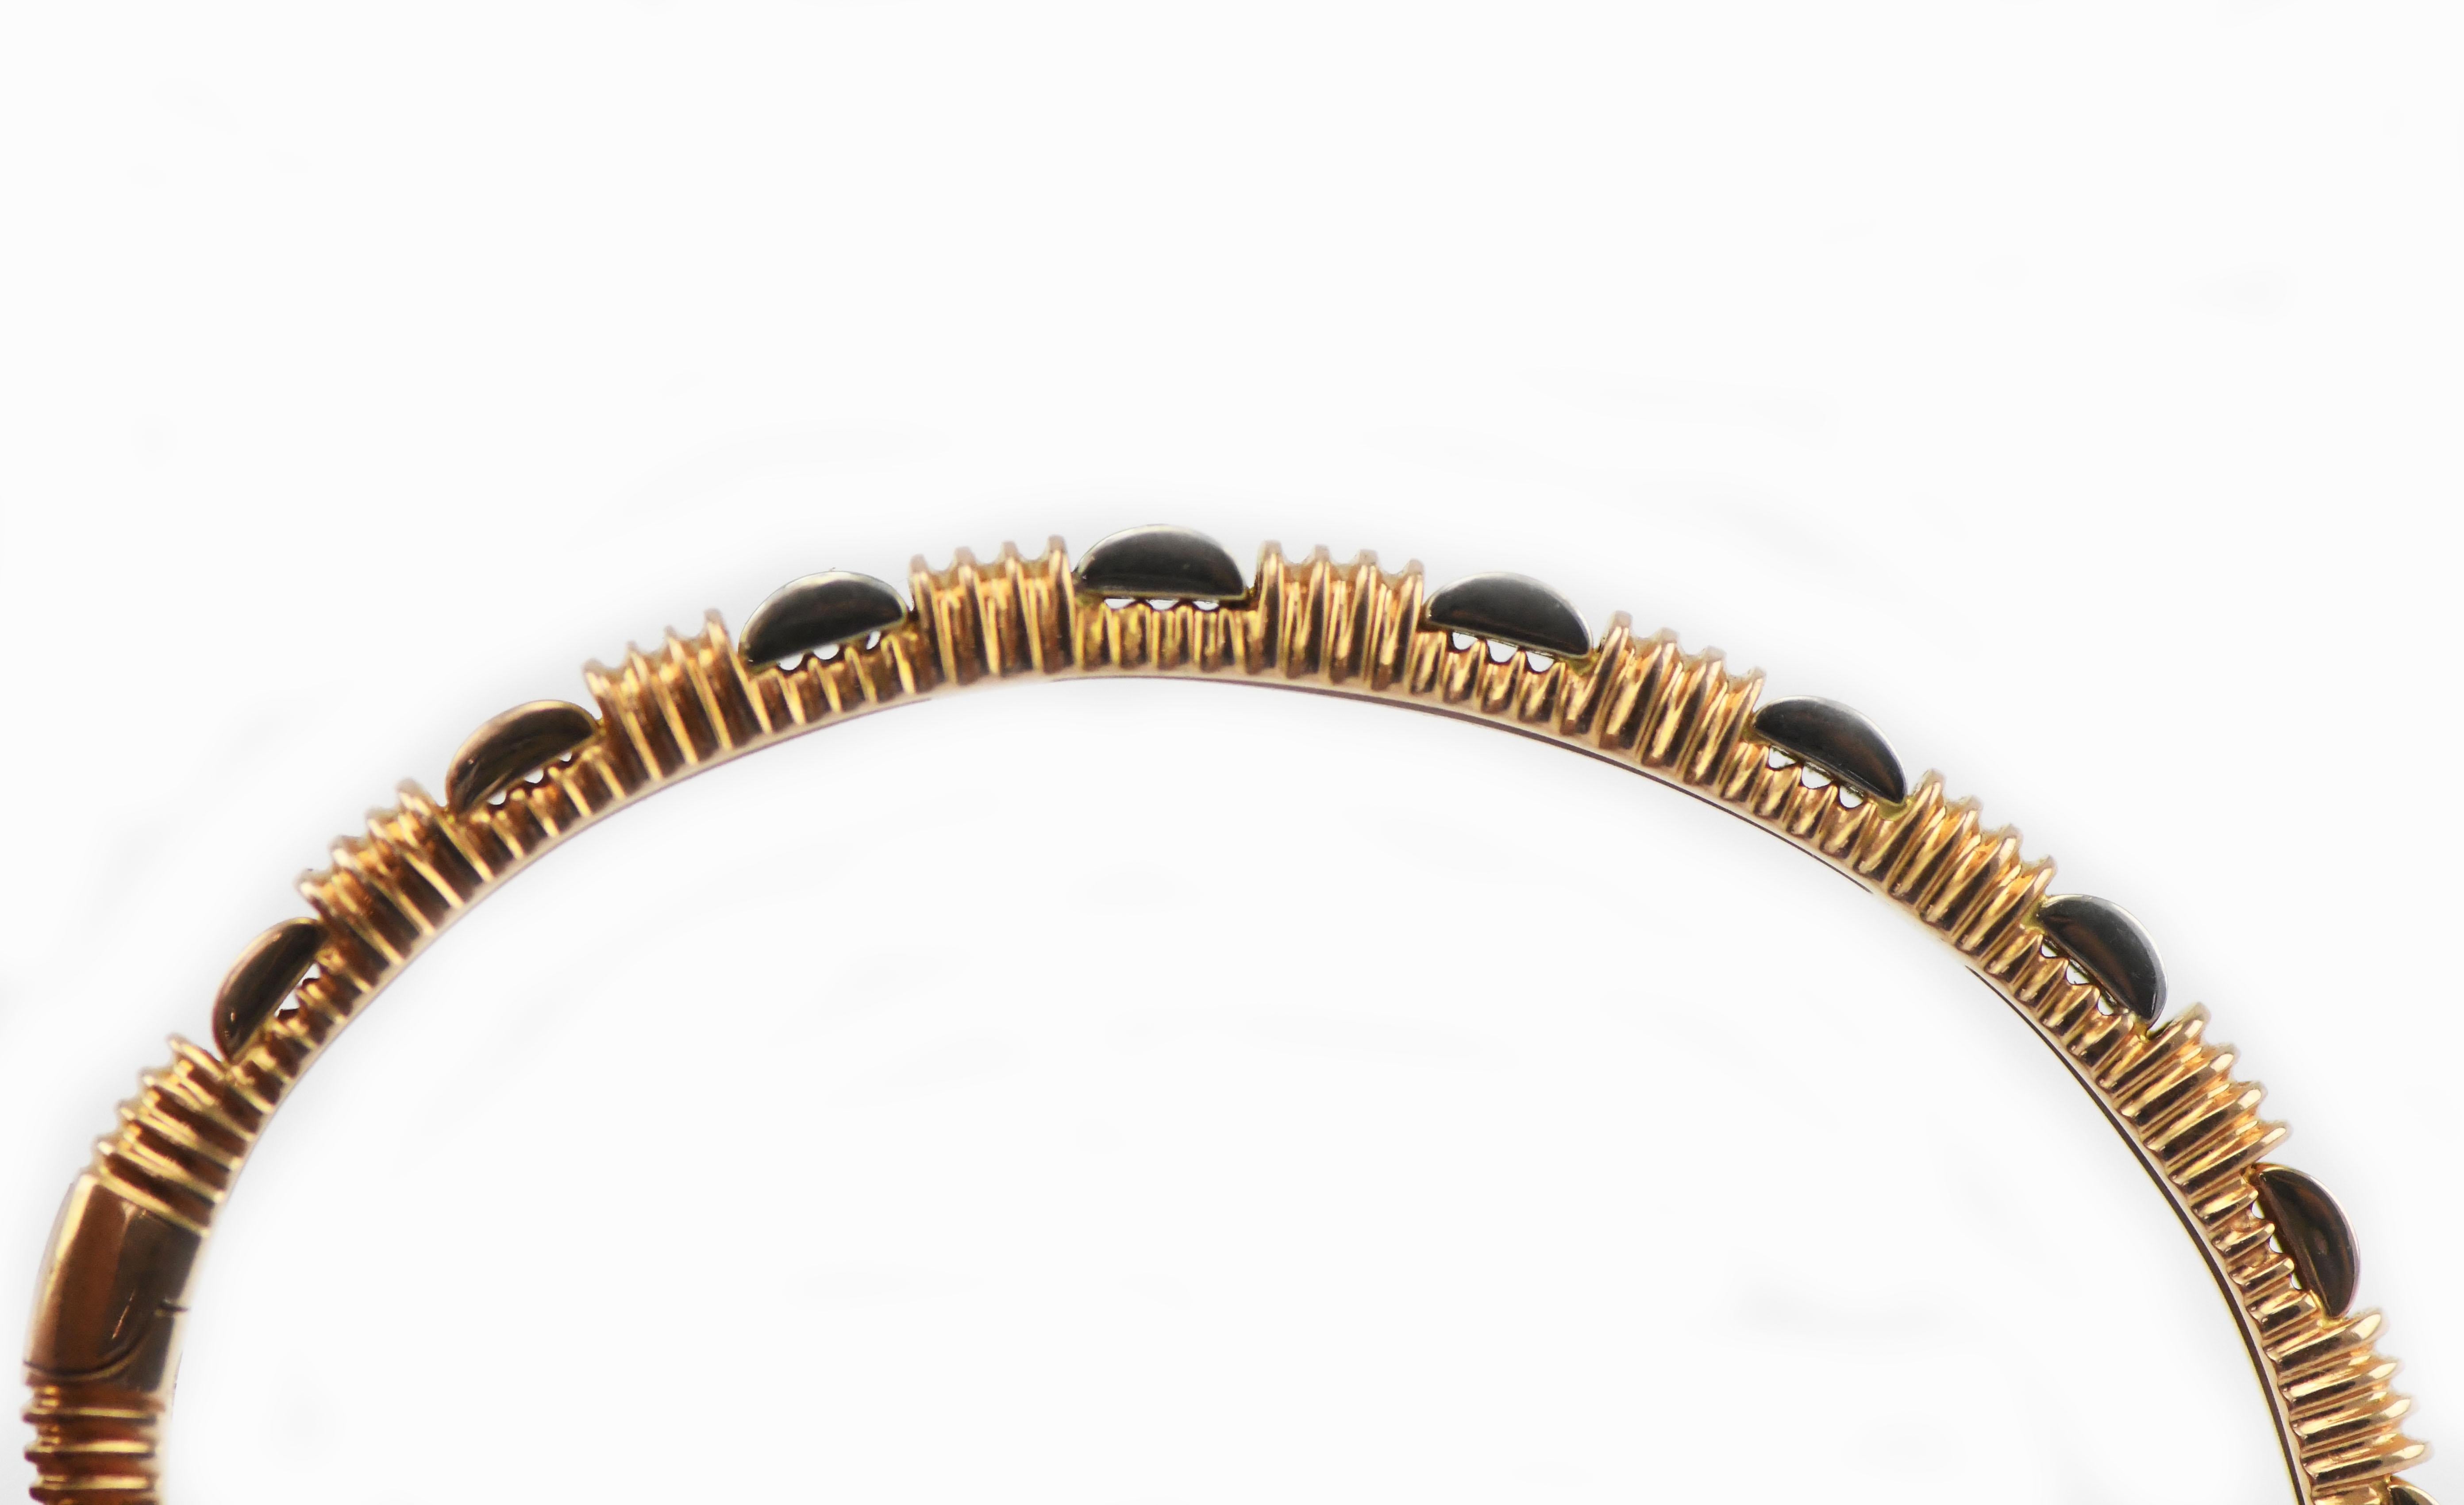 Roberto Coin 18k Rose Gold and Diamond Bracelet. Marked (Star 1226 VI)  Started in 1977, Roberto Coin is a comparatively young fine jewelry brand but it has quickly become an international sensation. Most pieces are marked with a small ruby but not